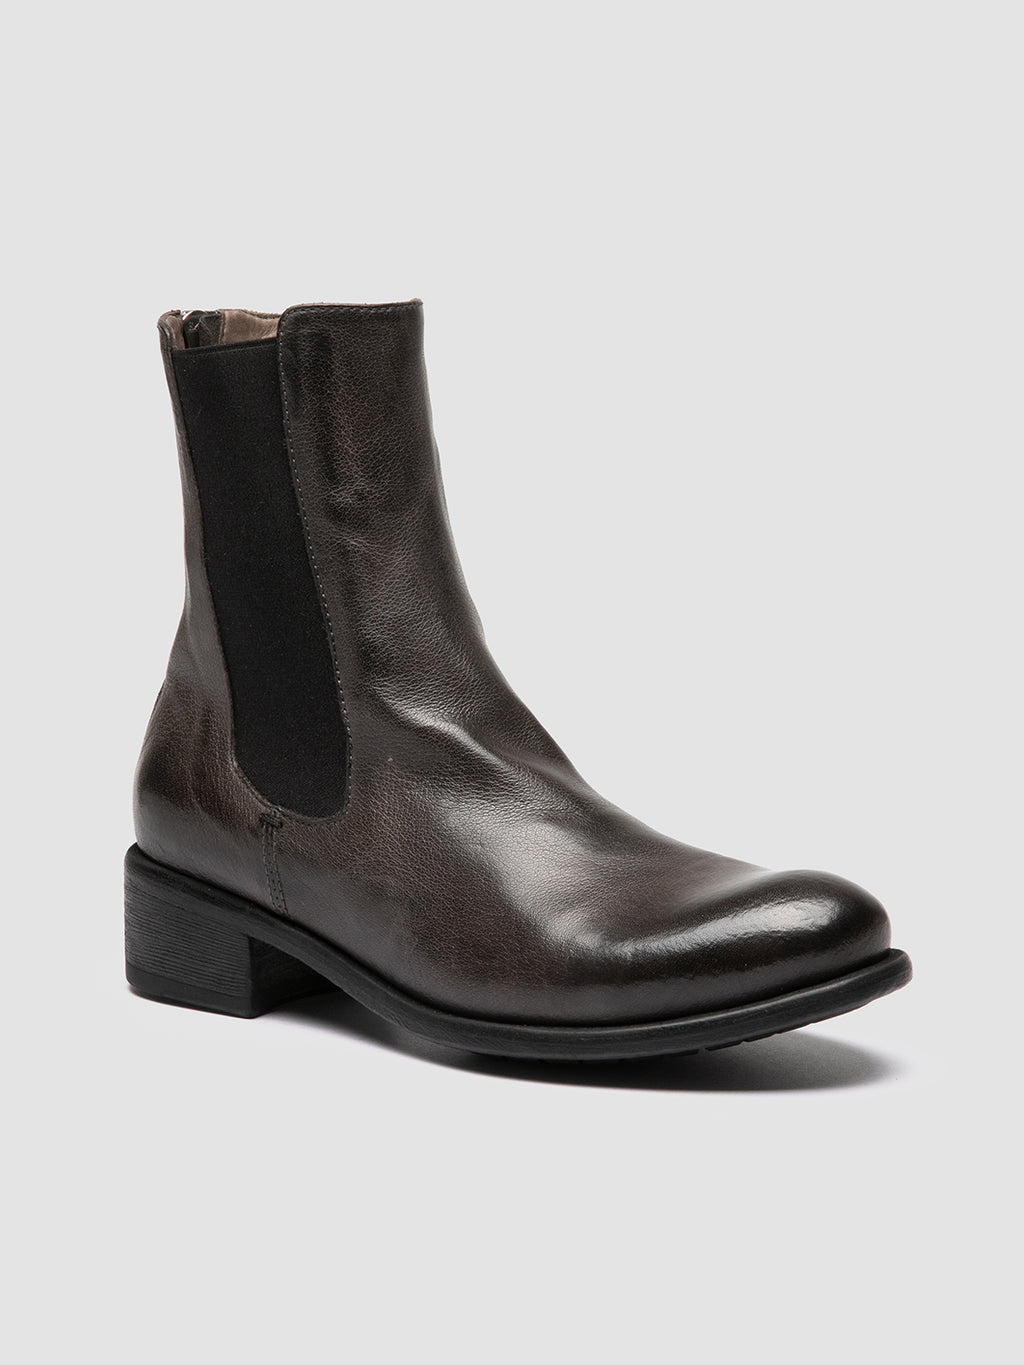 LIS 003 - Grey Leather Chelsea Boots Women Officine Creative - 3